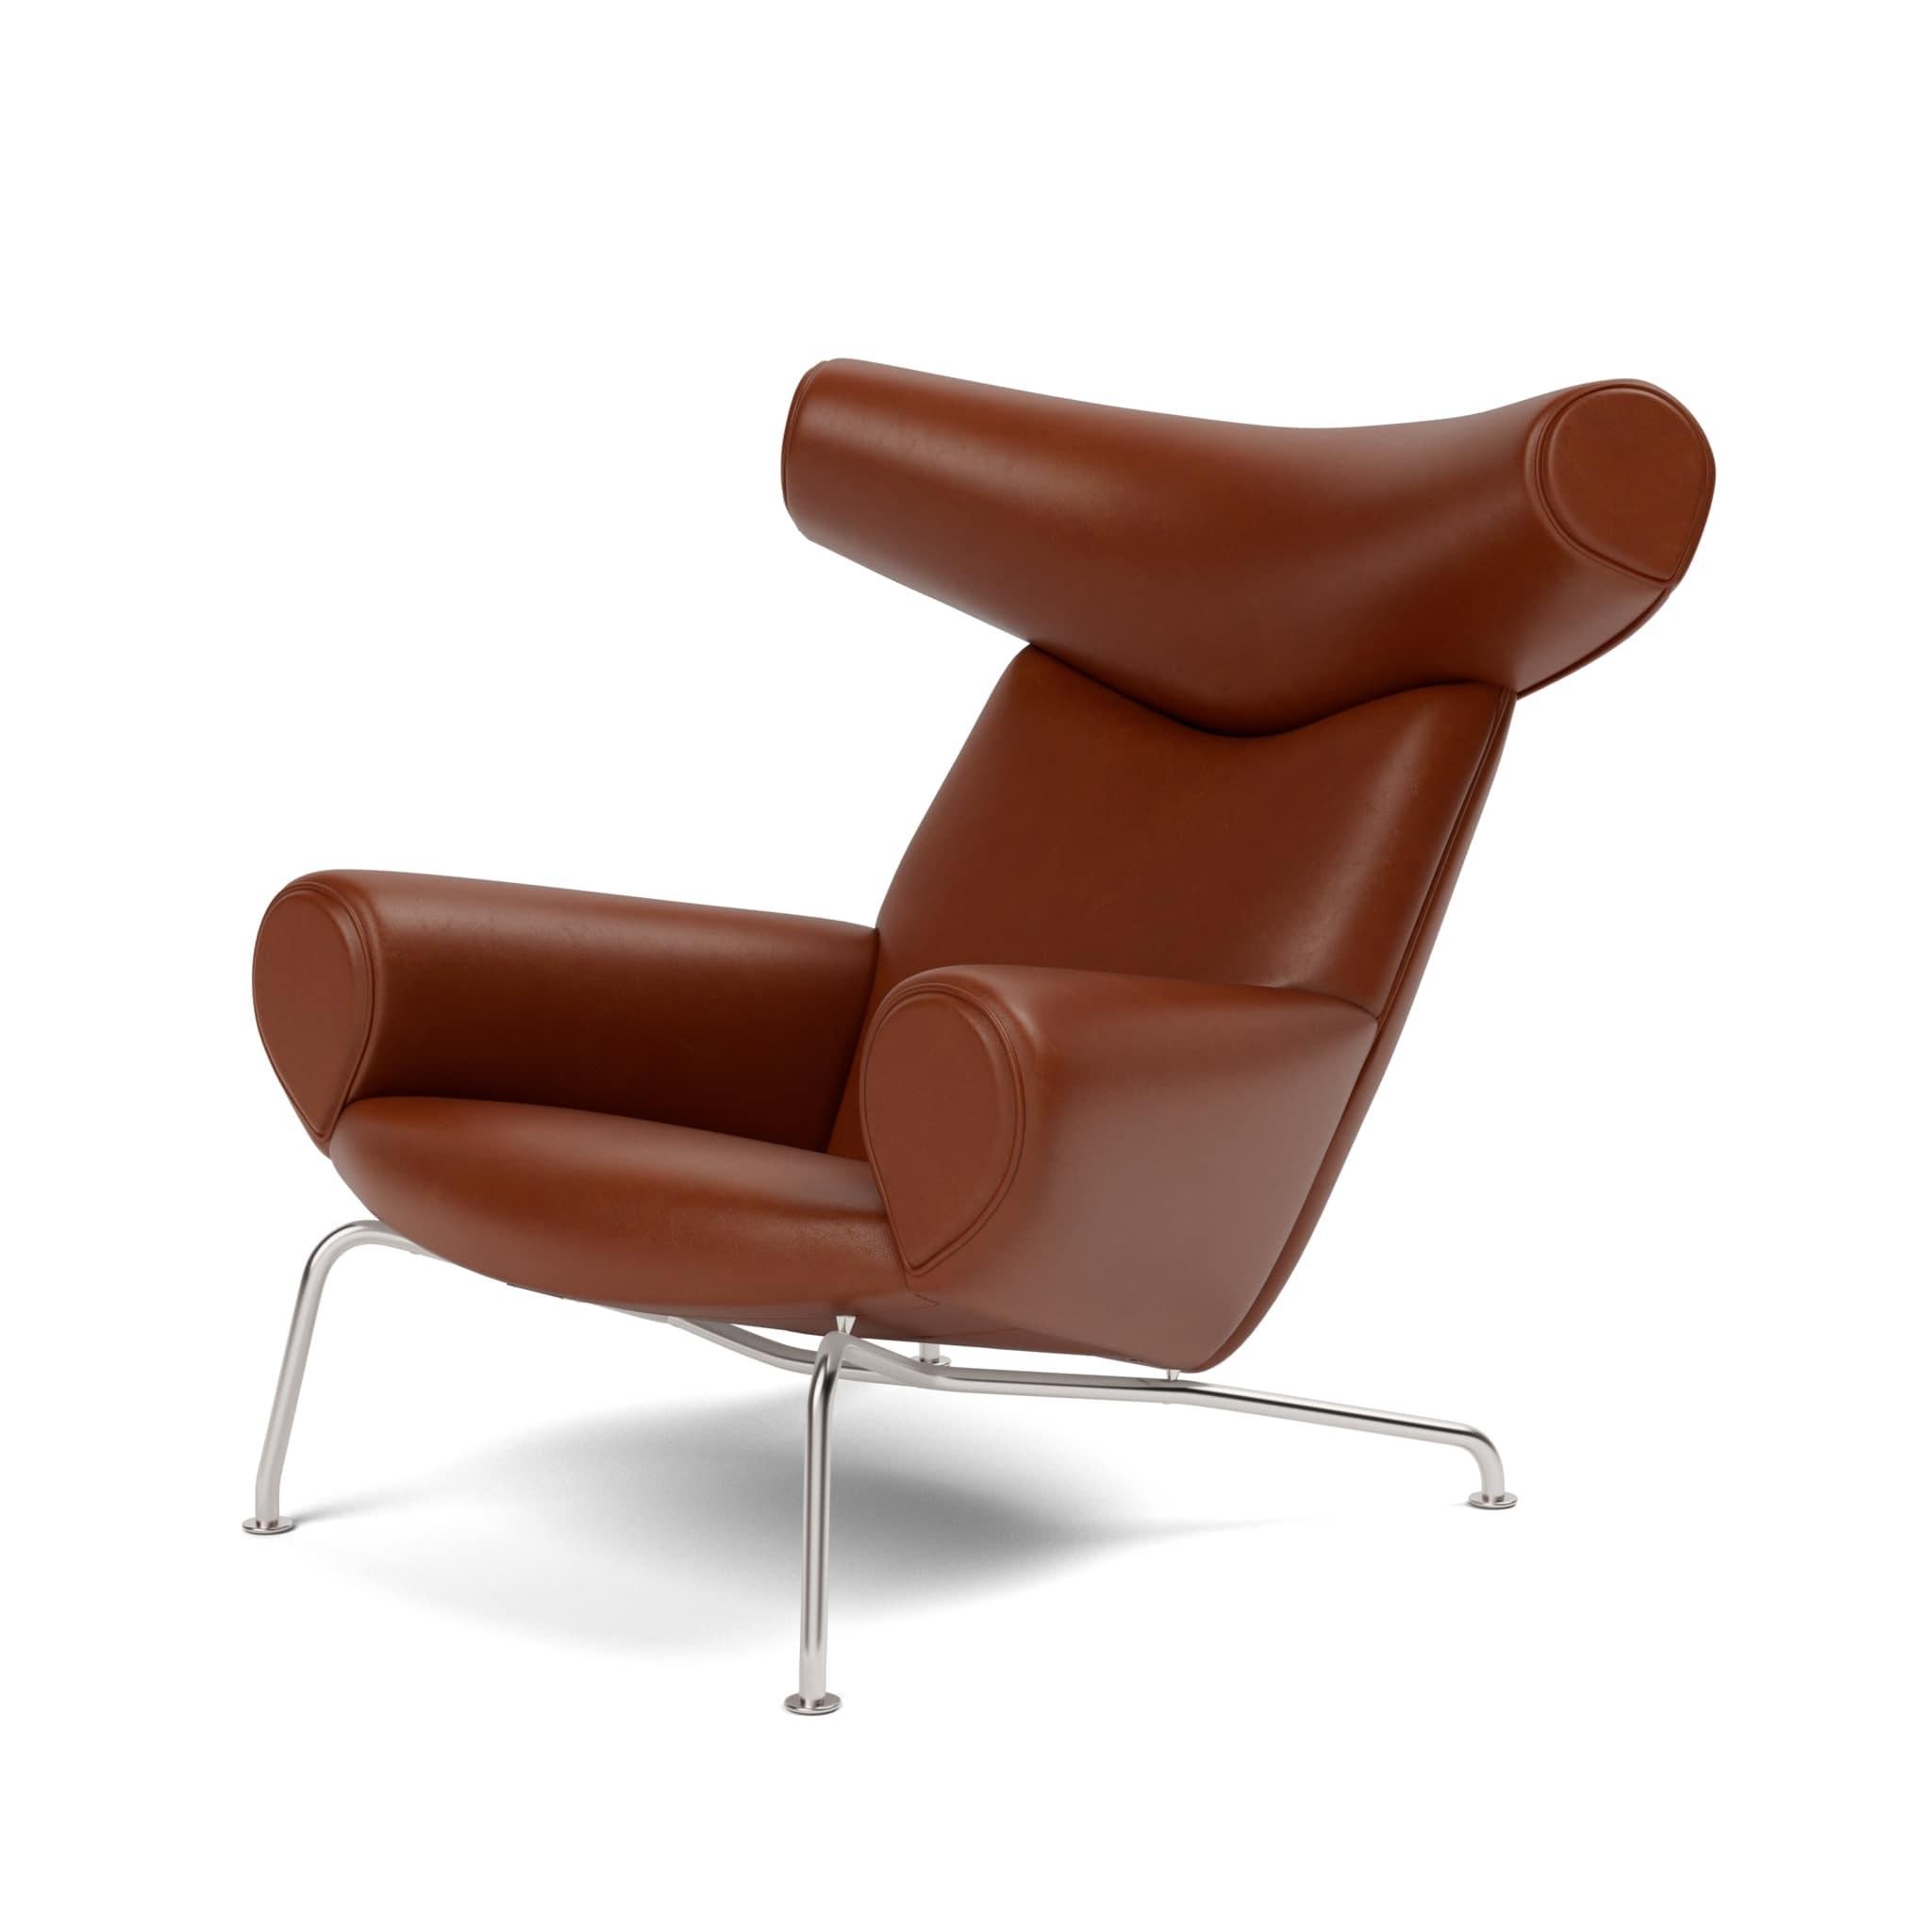 Danish Wegner Ox Chair-Russet Brown/Brushed Stainless Steel-by HansJ. Wegner Fredericia For Sale